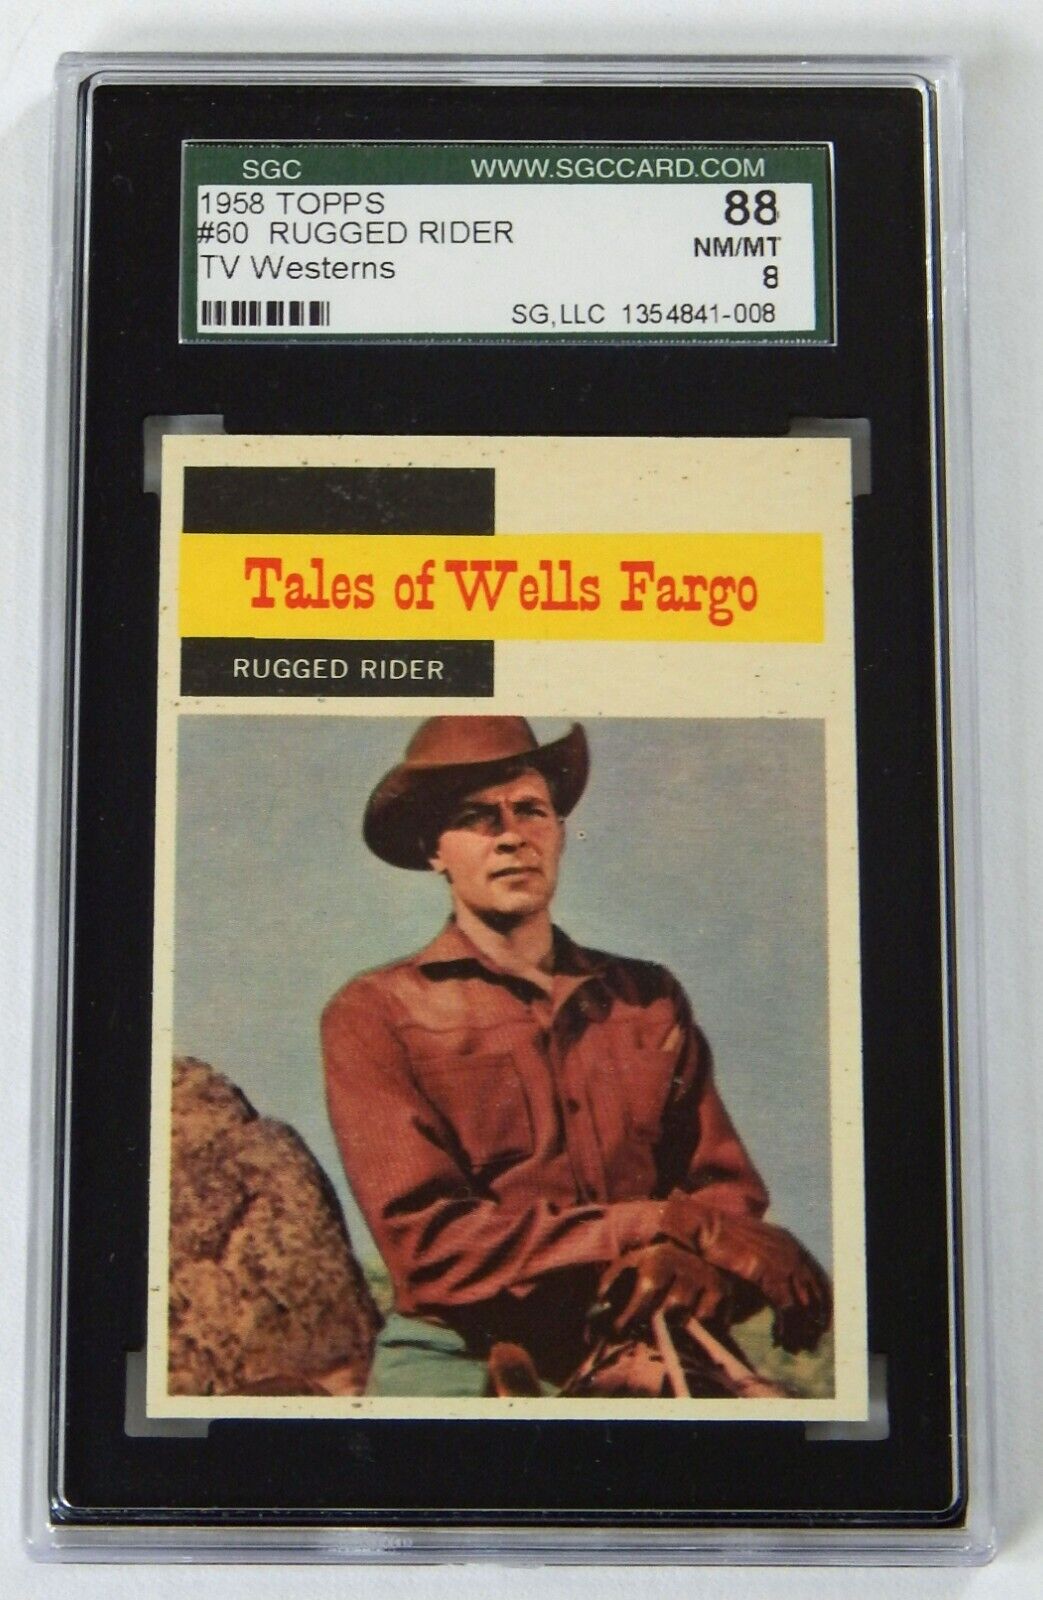 1958 Topps TV Westerns #60 Rugged Rider Tales of Wells Fargo SGC 88 NM/MT 8